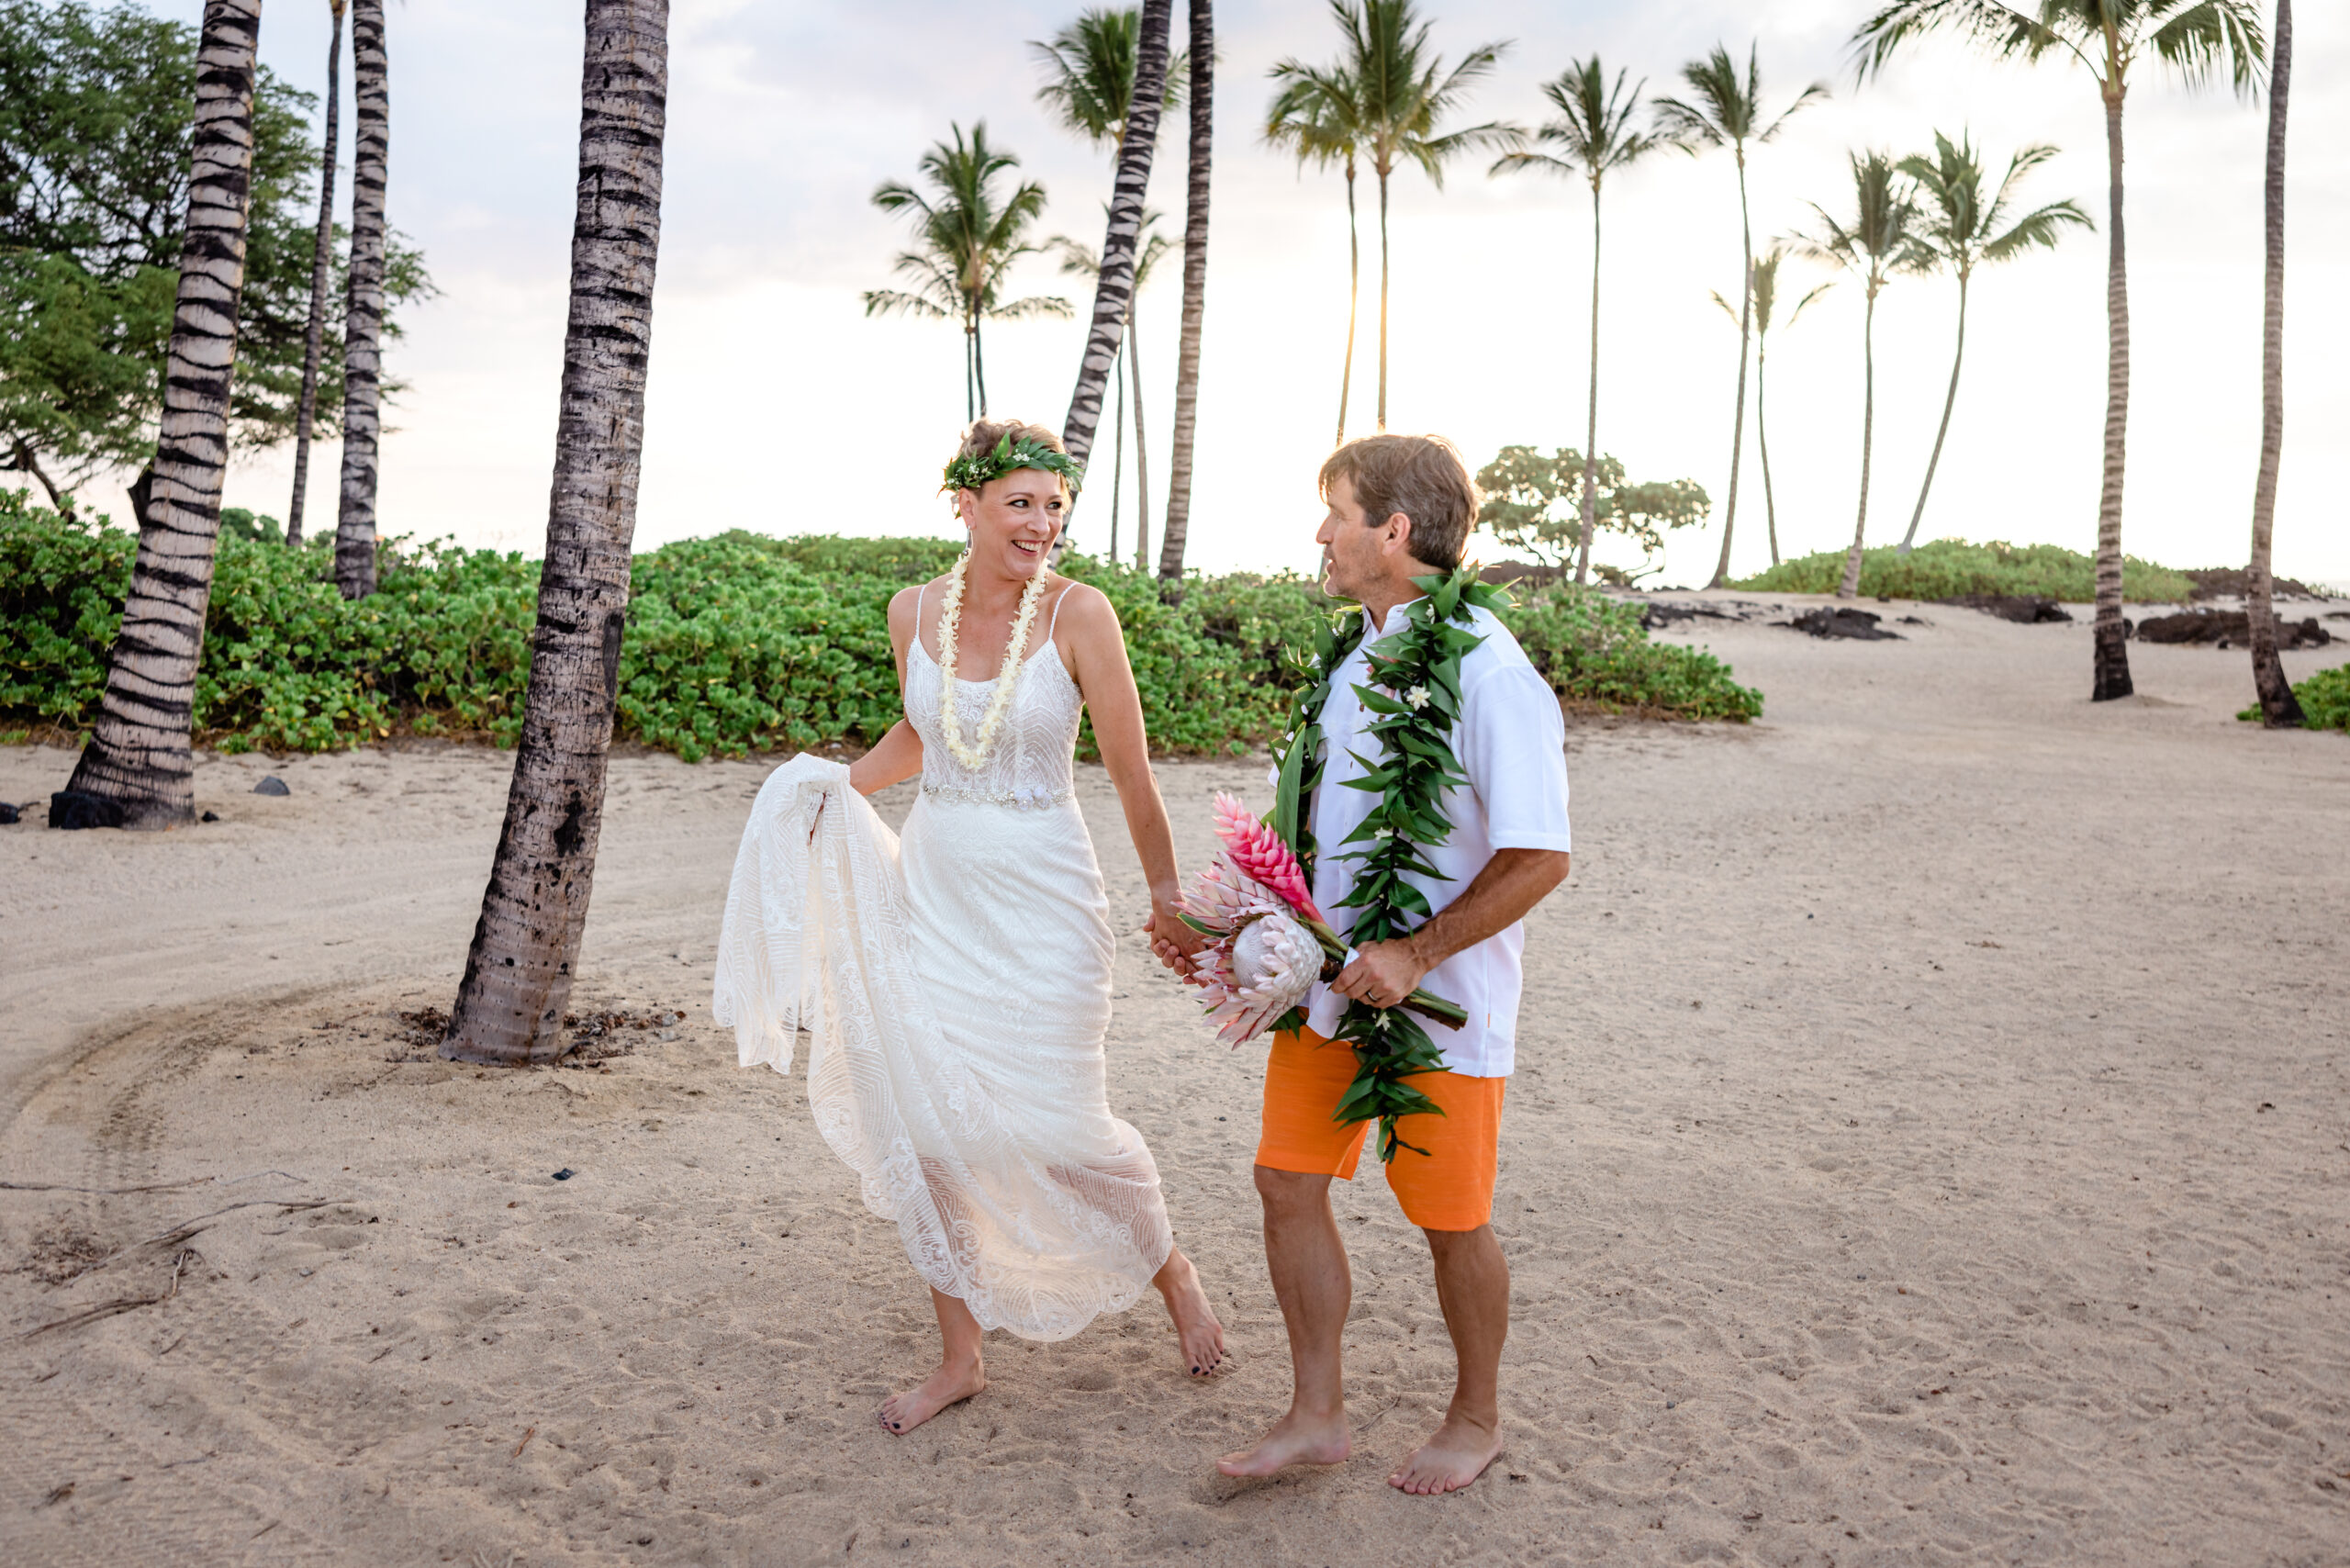 Couple on the beach after their Big Island elopement. Photo by Dawn Eicher